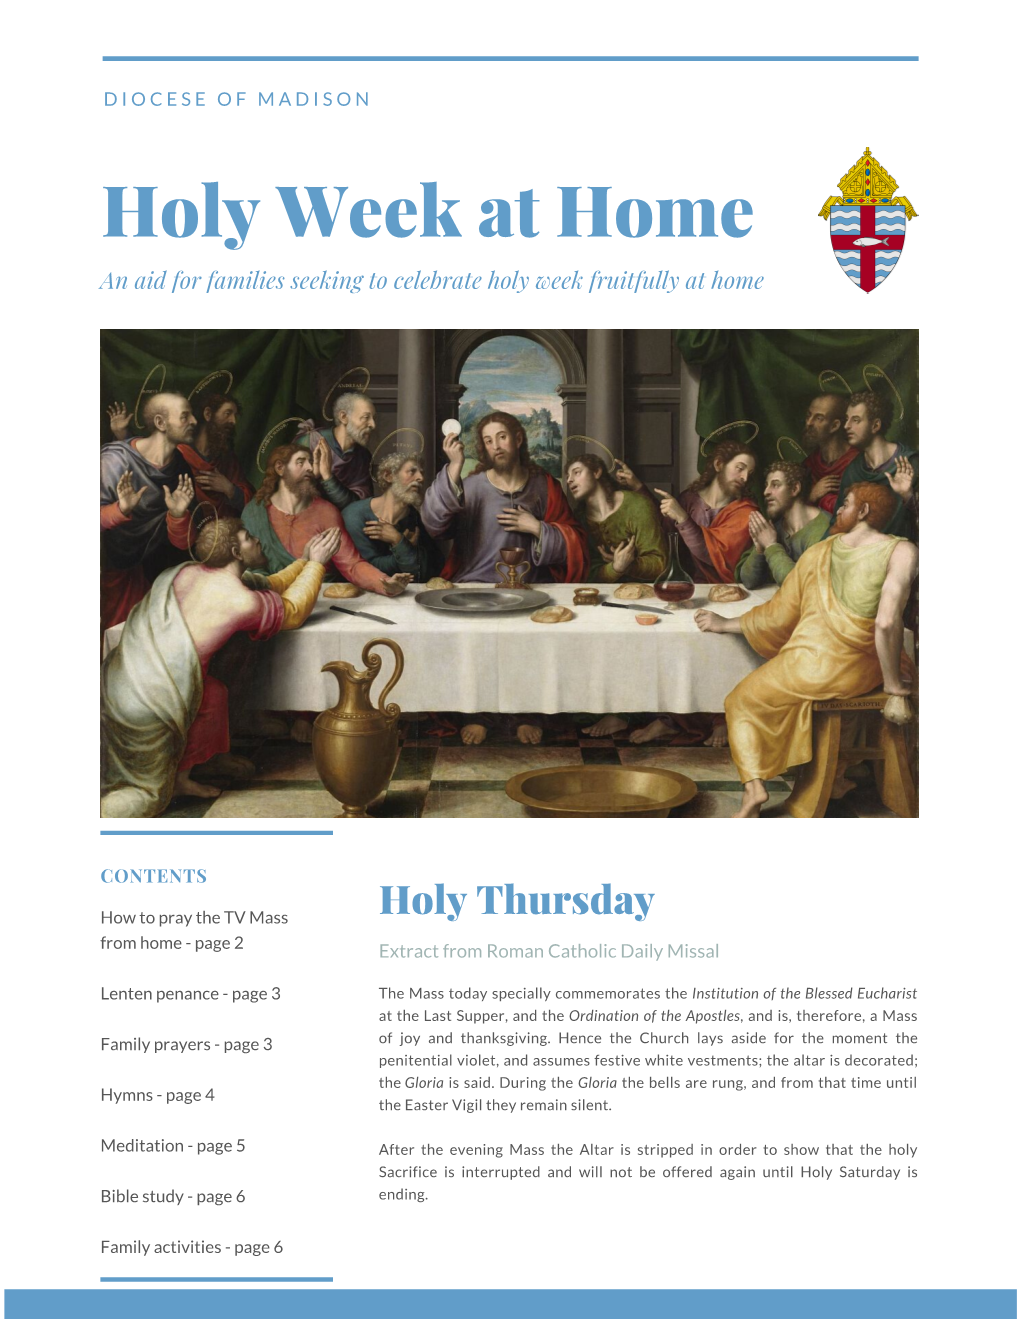 Holy Thursday from Home - Page 2 Extract from Roman Catholic Daily Missal